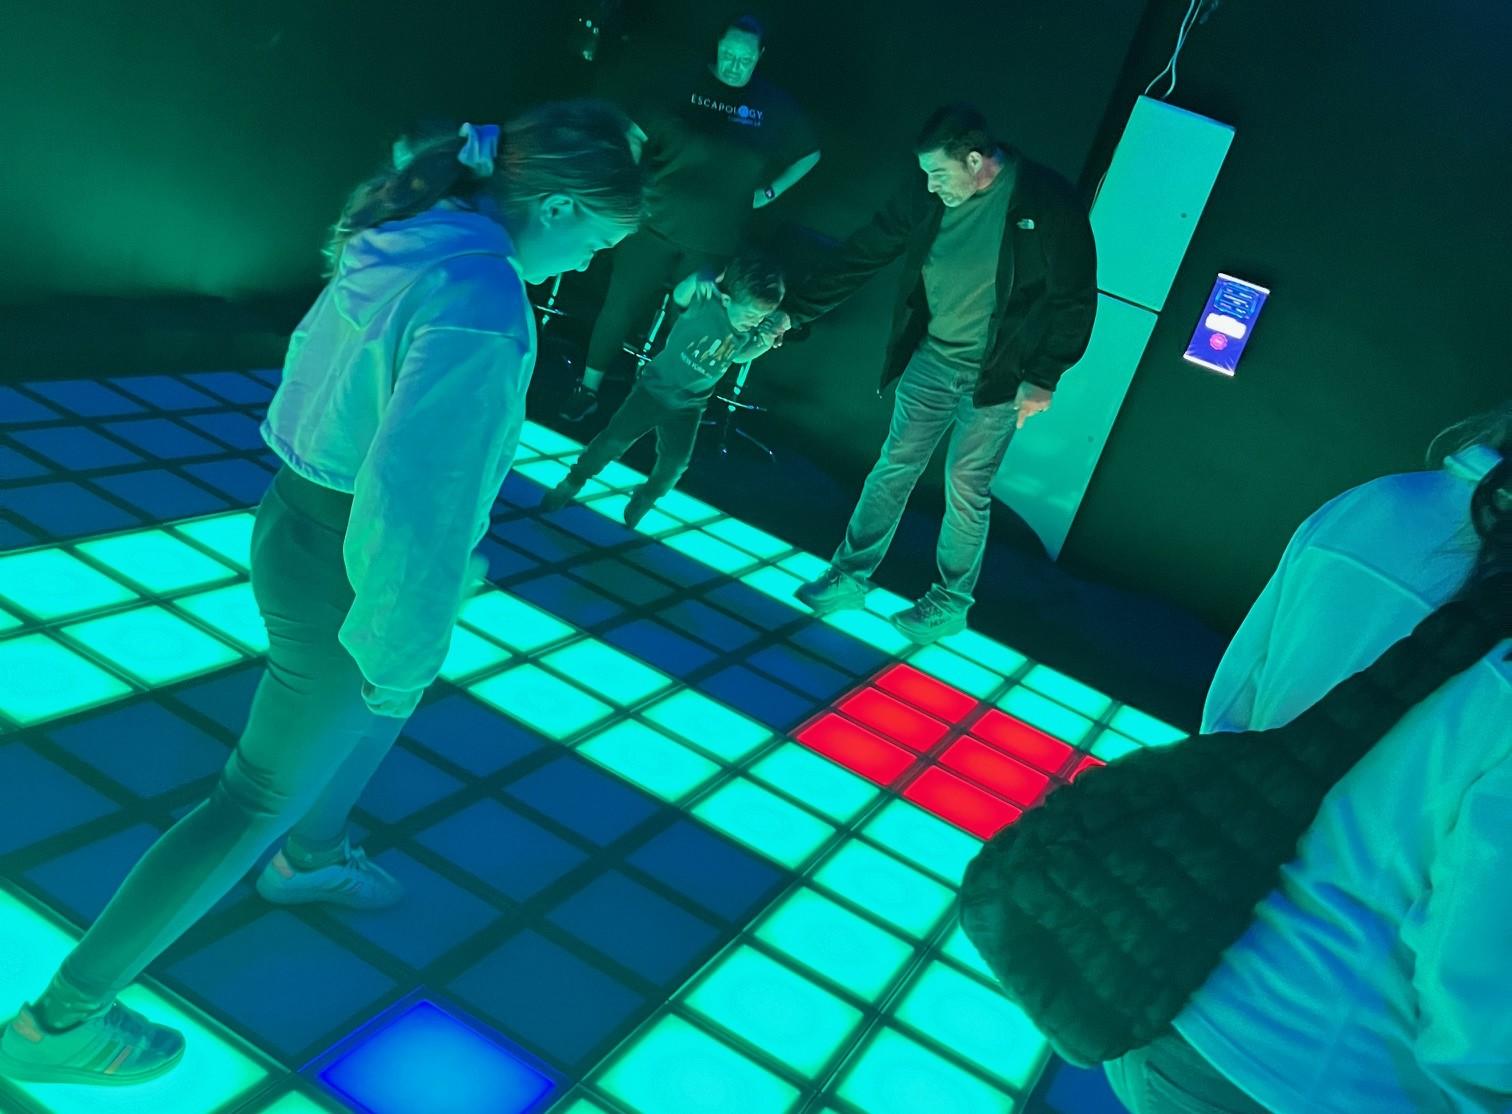 LED Gaming Floor at Escapology Covington 